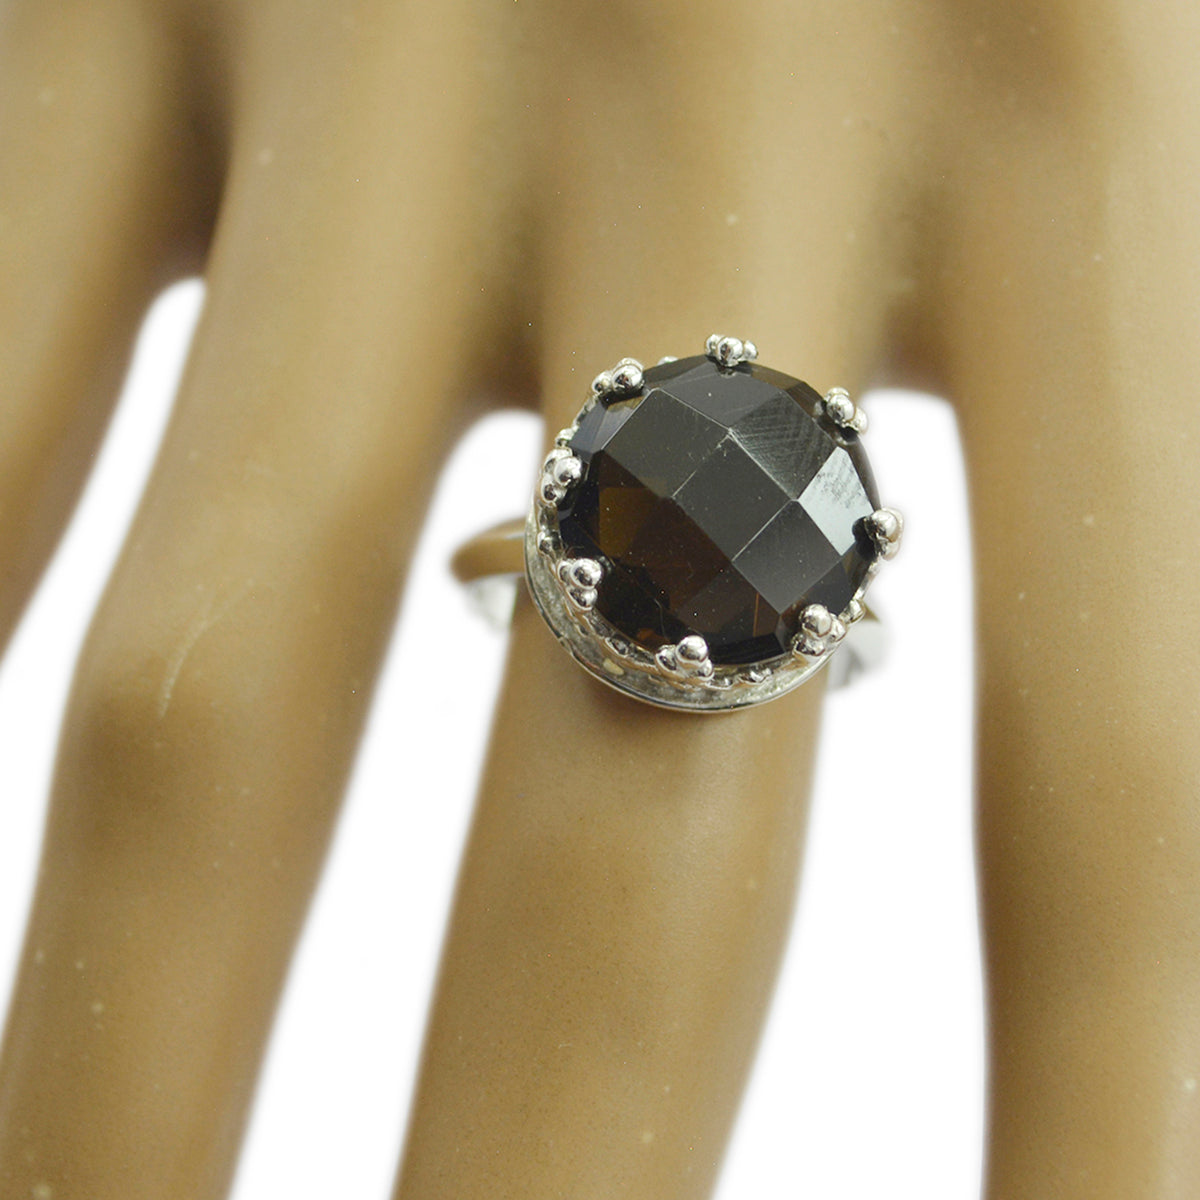 Attractive Stone Smoky Quartz Solid Silver Ring Jewelry Pawn Shop